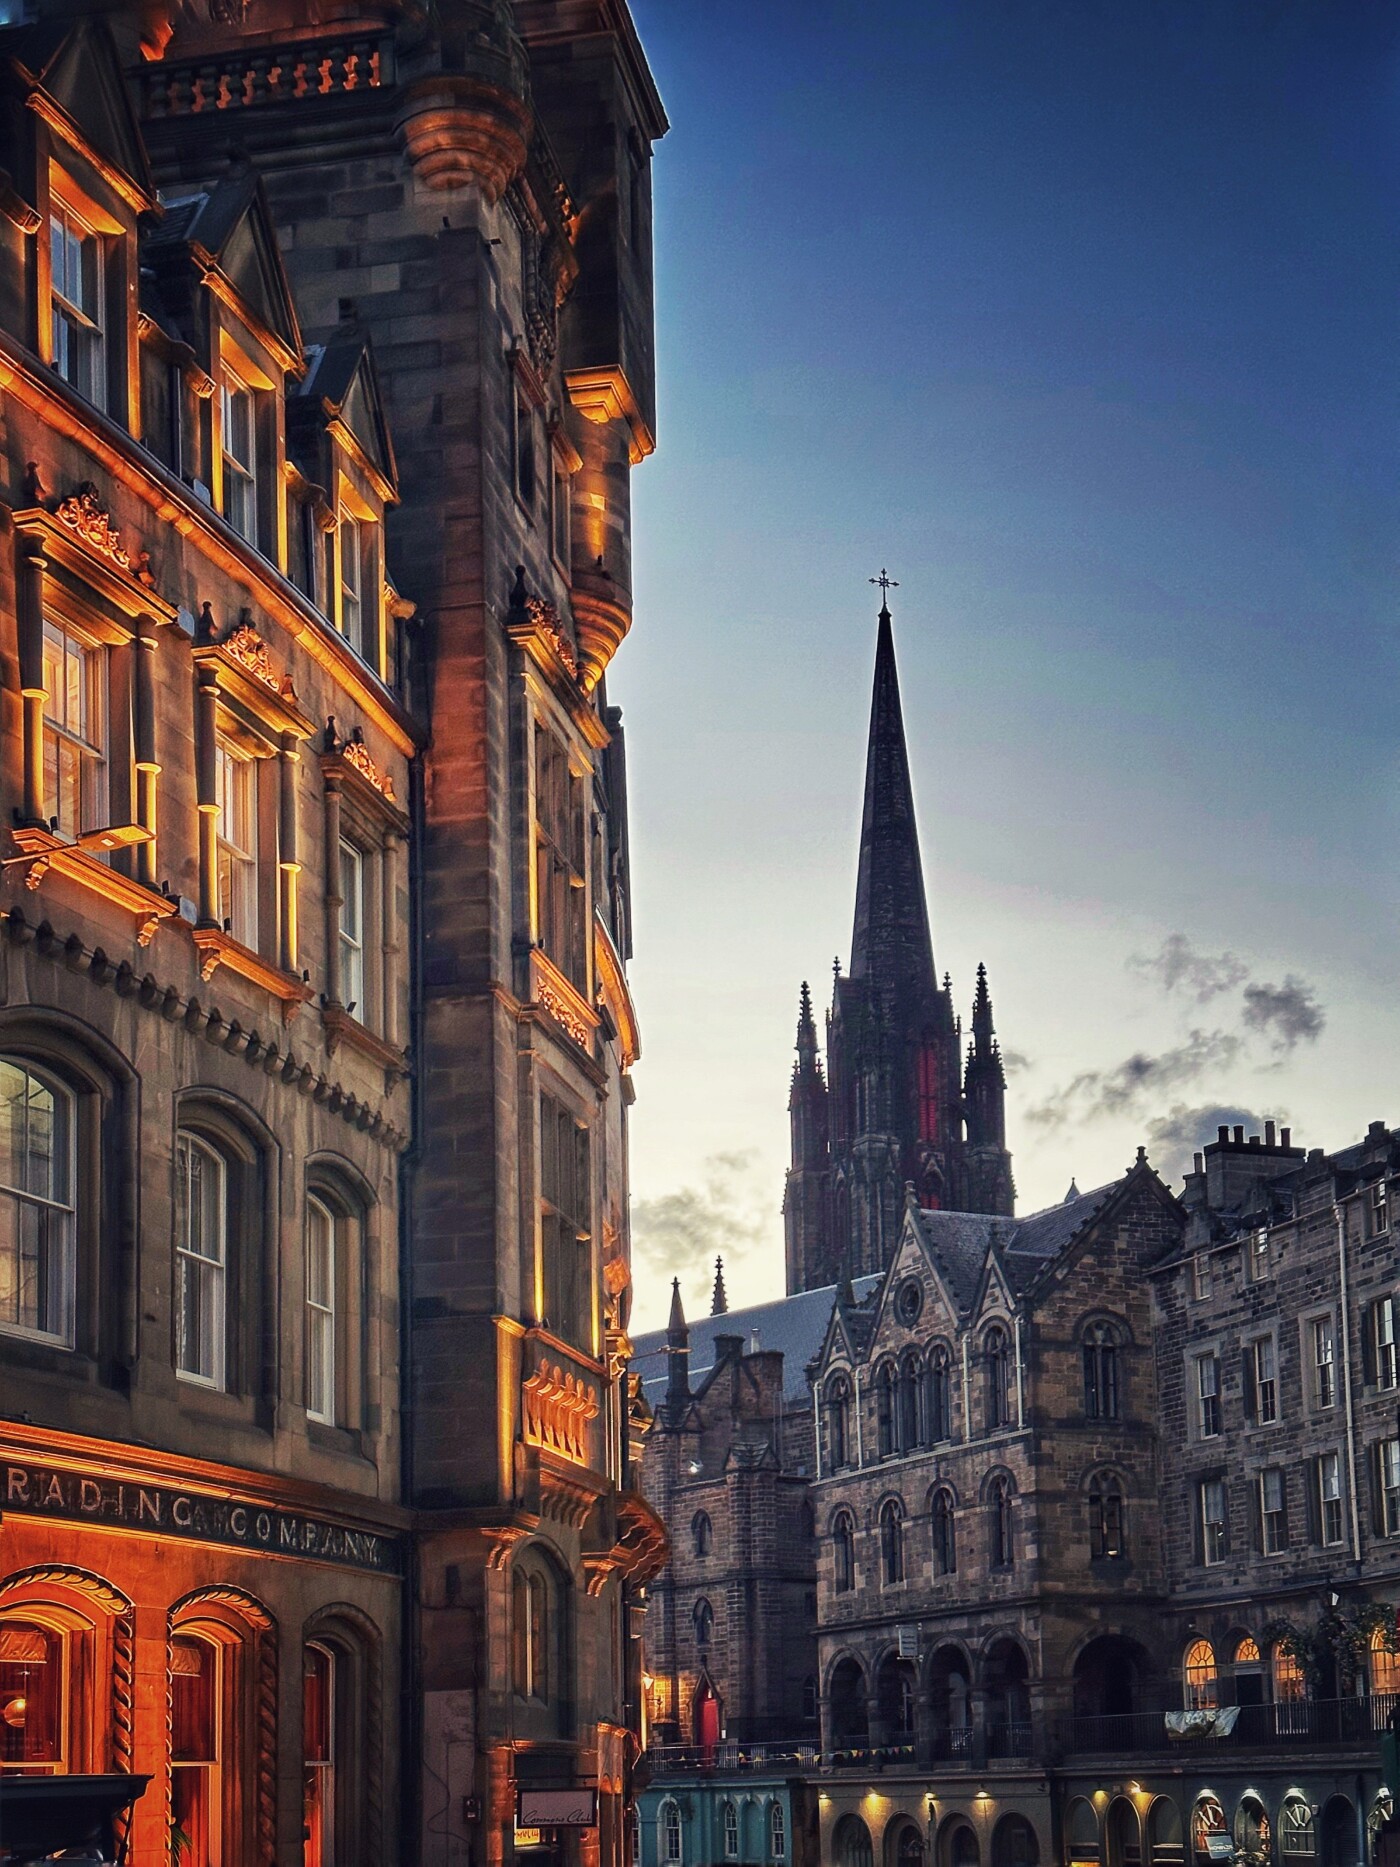 To me, every building in Edinburg looks like a castle so capturing the glow of sunset just brought o...